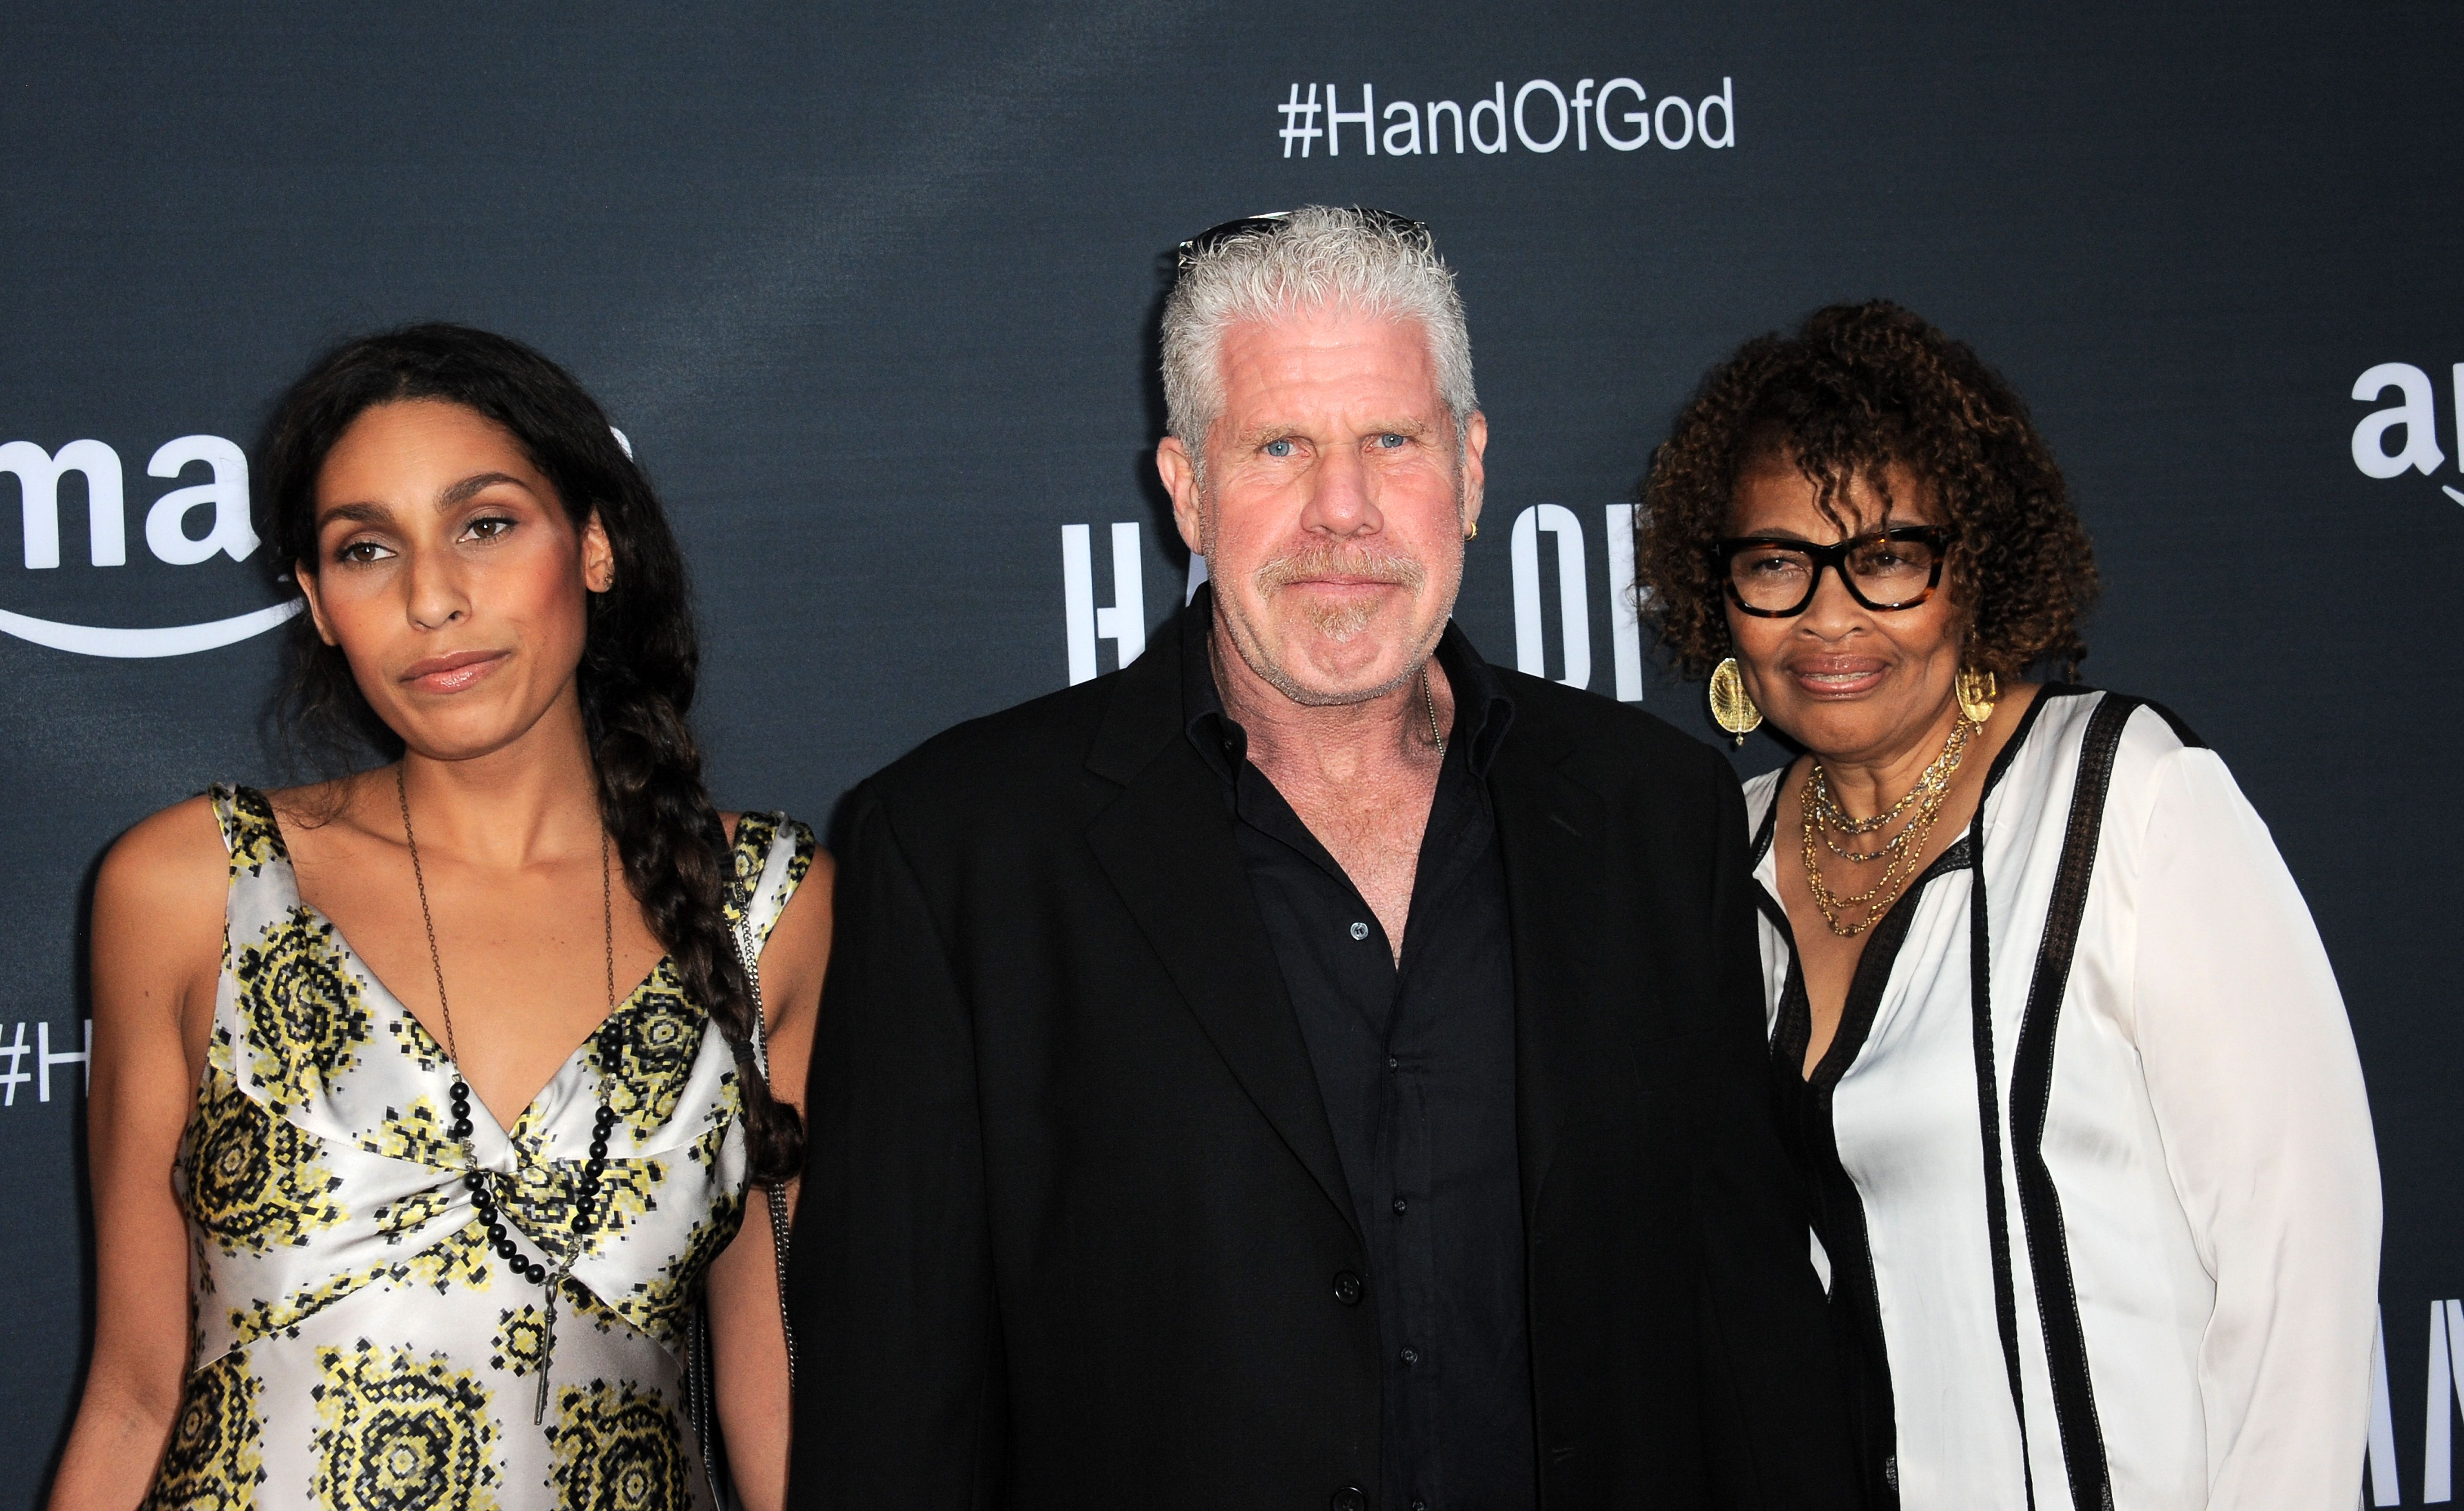 Blake Perlman, Ron Perlman and Opal Stone arrive for the Premiere Of Amazon's Series "Hand Of God" held at Ace Theater Downtown LA on August 19, 2015 in Los Angeles, California. | Source: Getty Images